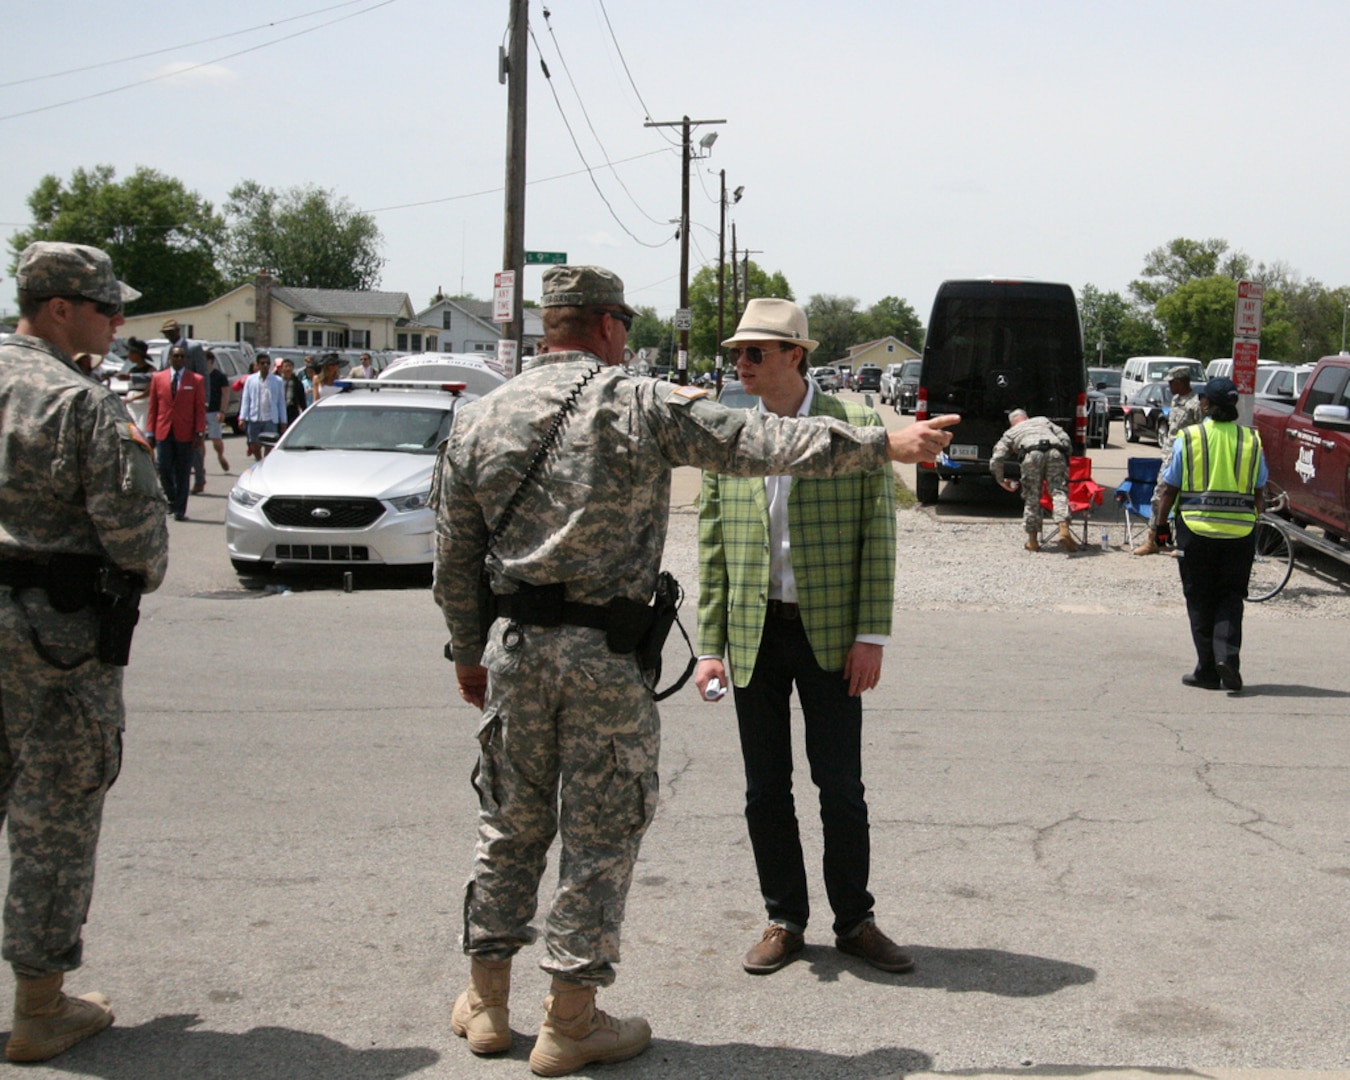 When spectators arrived at Church Hill Downs on May 4, 2014, they had lots of questions and required some directions. Sgt. James Hagan provides assistance whenever possible so visitors can enjoy their experience at the Kentucky Derby.
